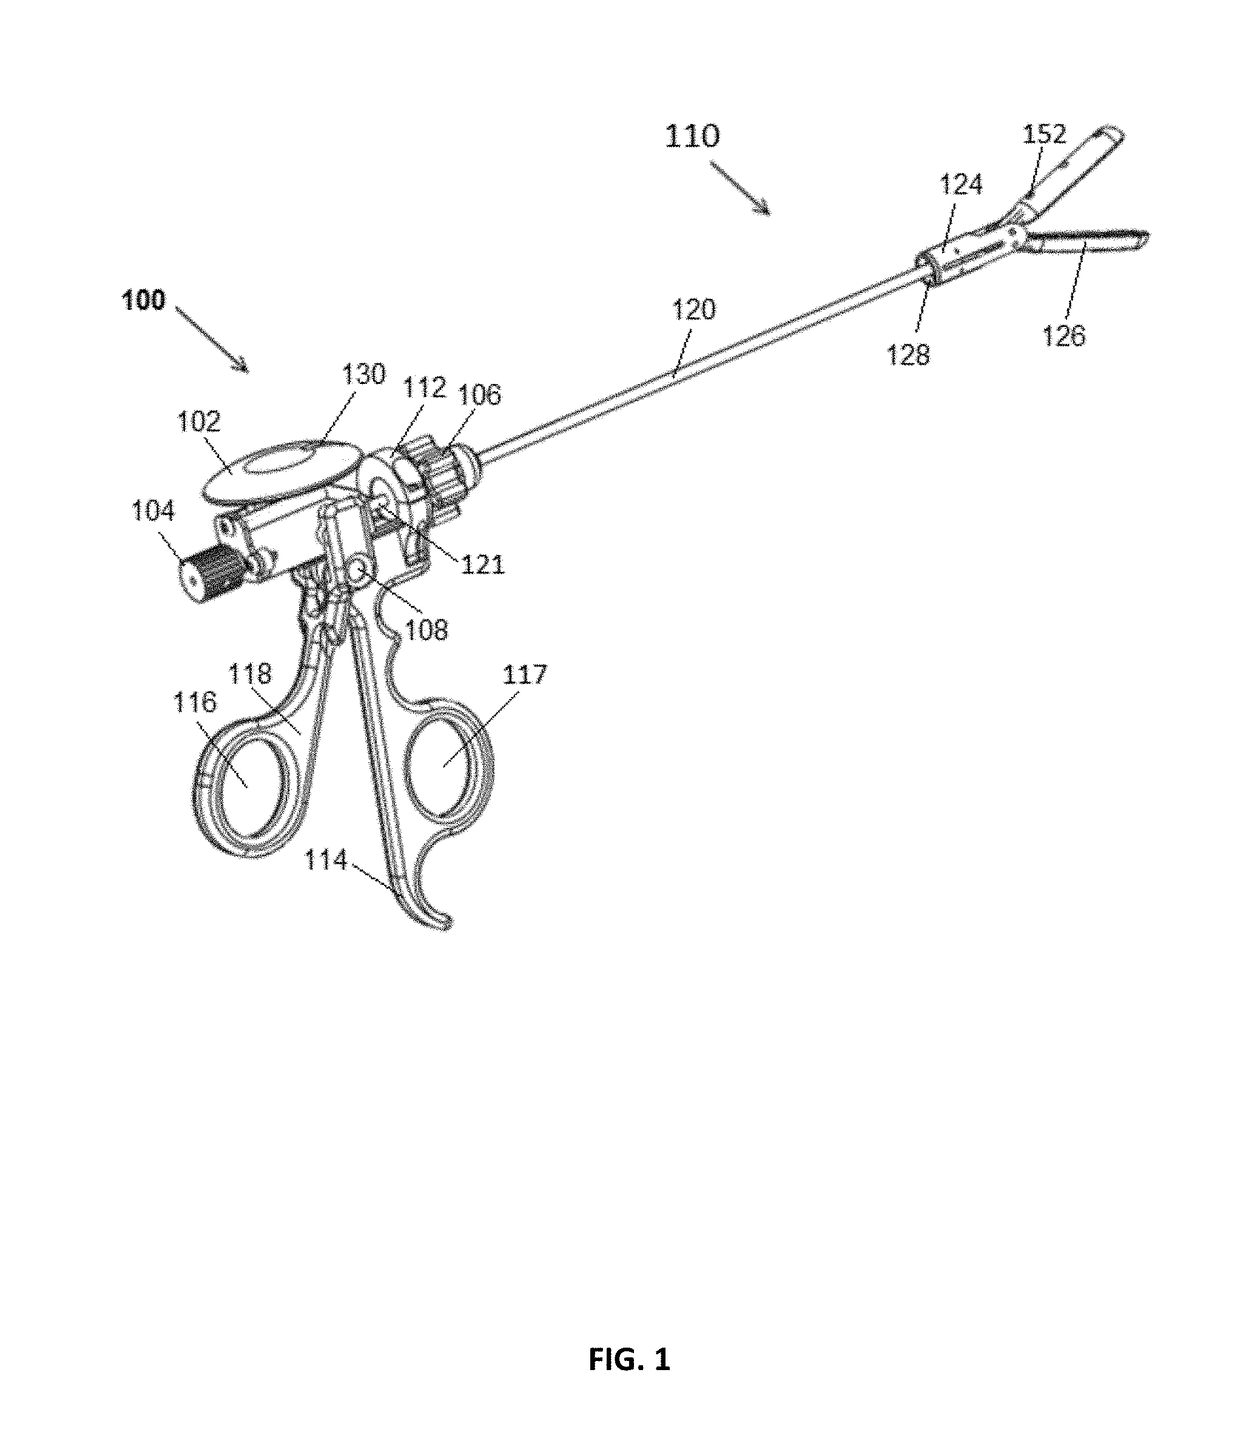 Multifunction surgical instrument for use in laparoscopic surgery